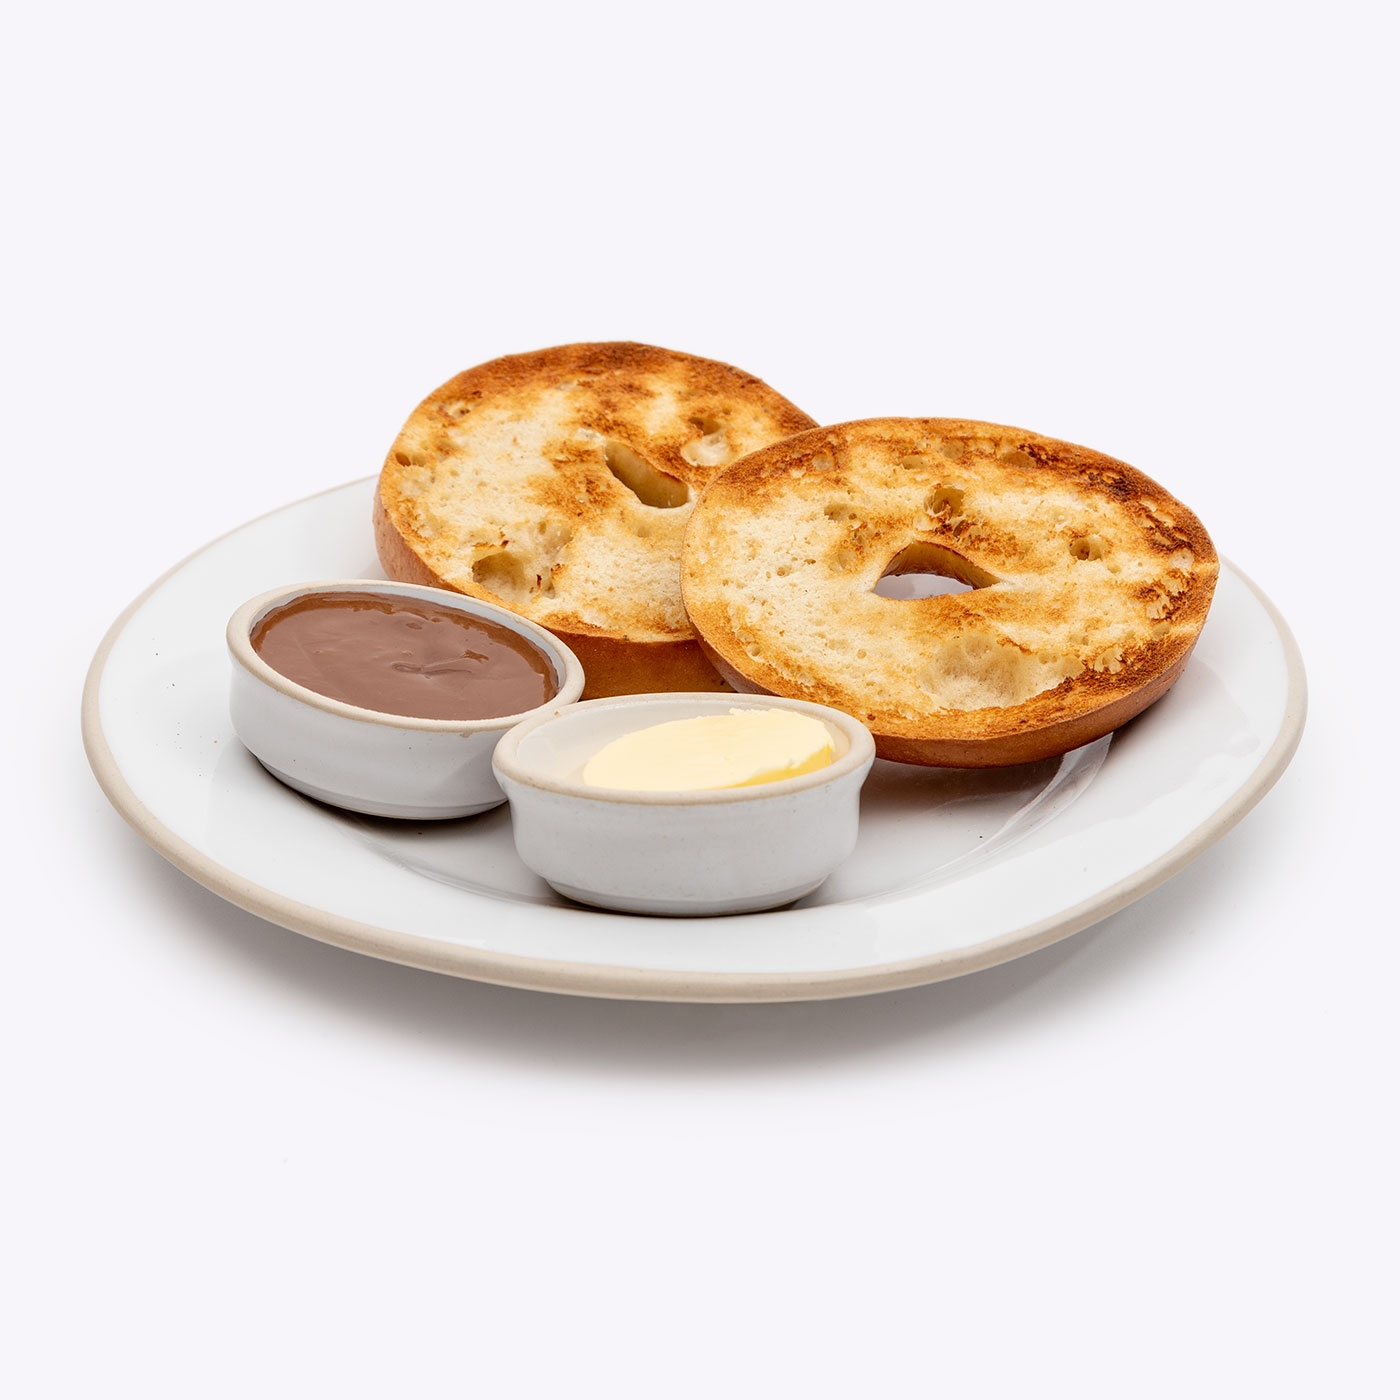 Toasted Plain Bagel with Butter & Chocolate and Hazelnut spread